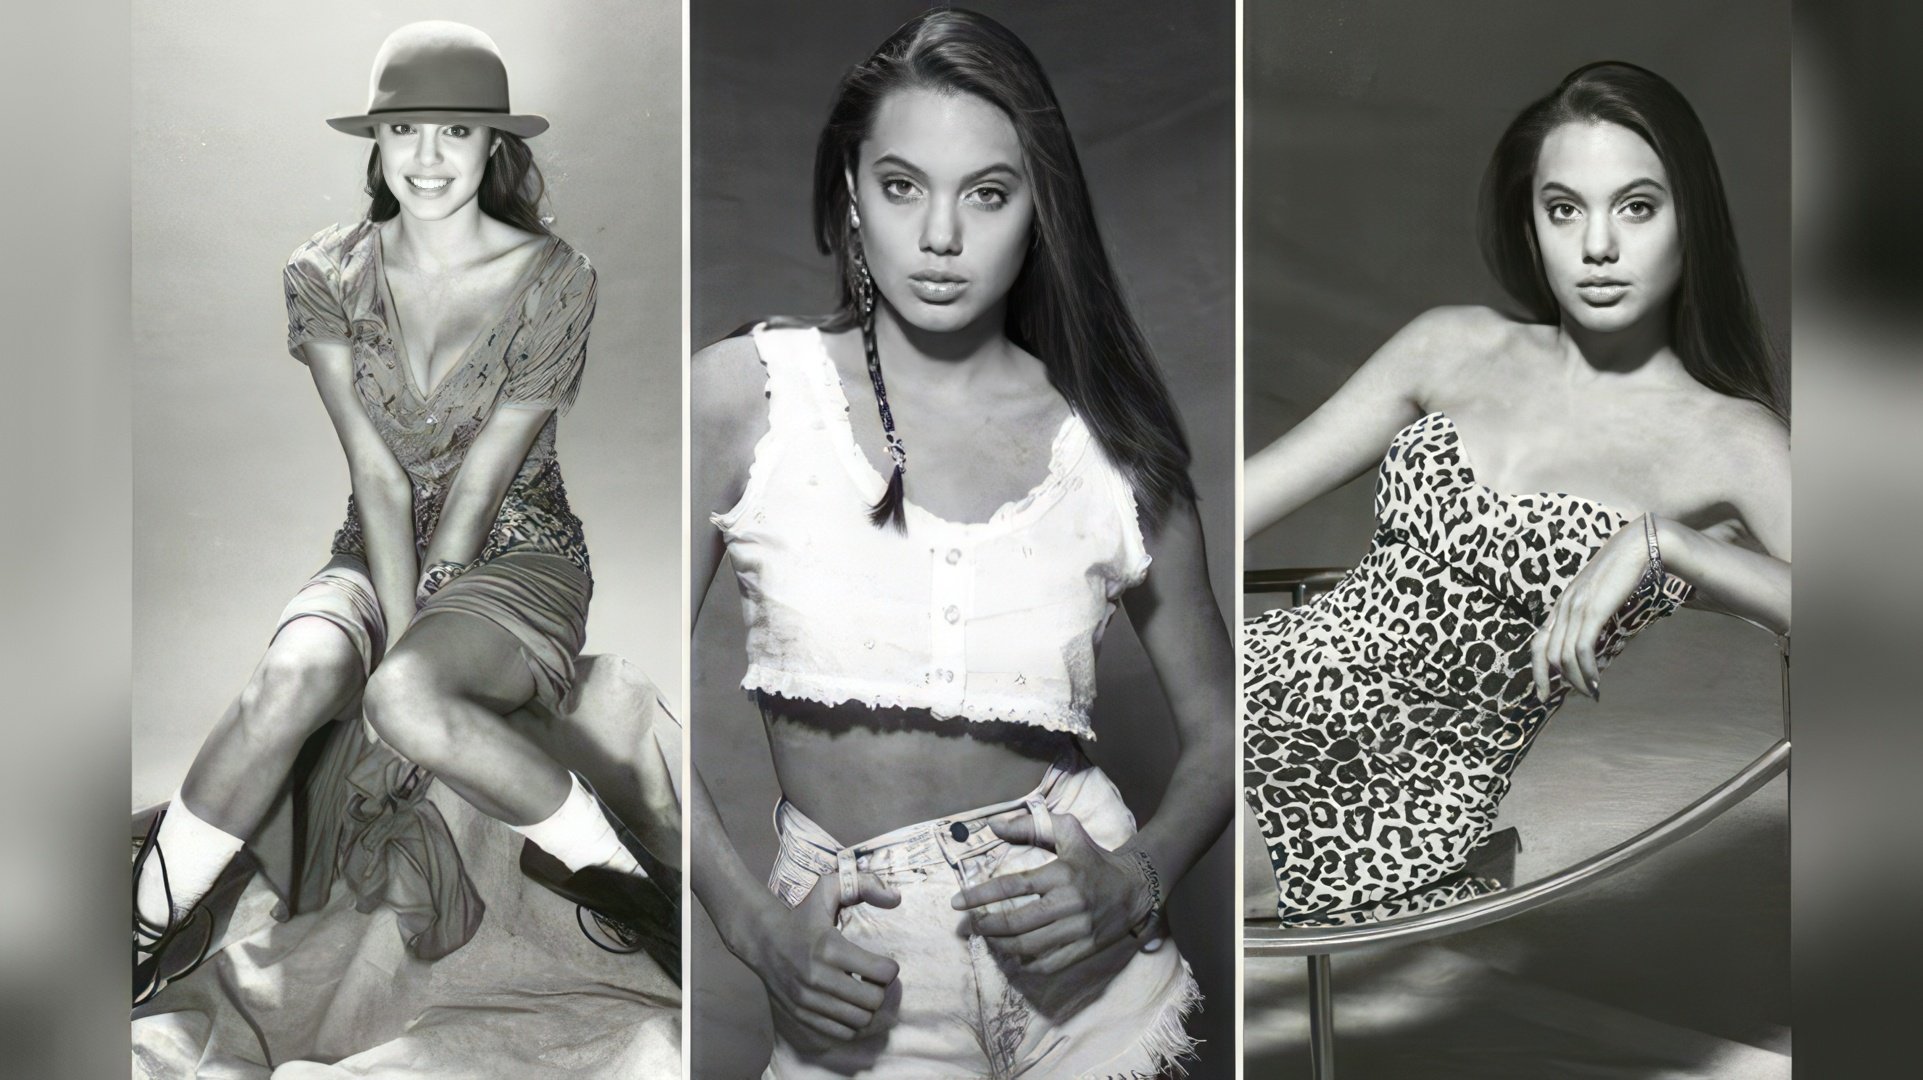 In her youth, Angelina Jolie dreamed of becoming a model